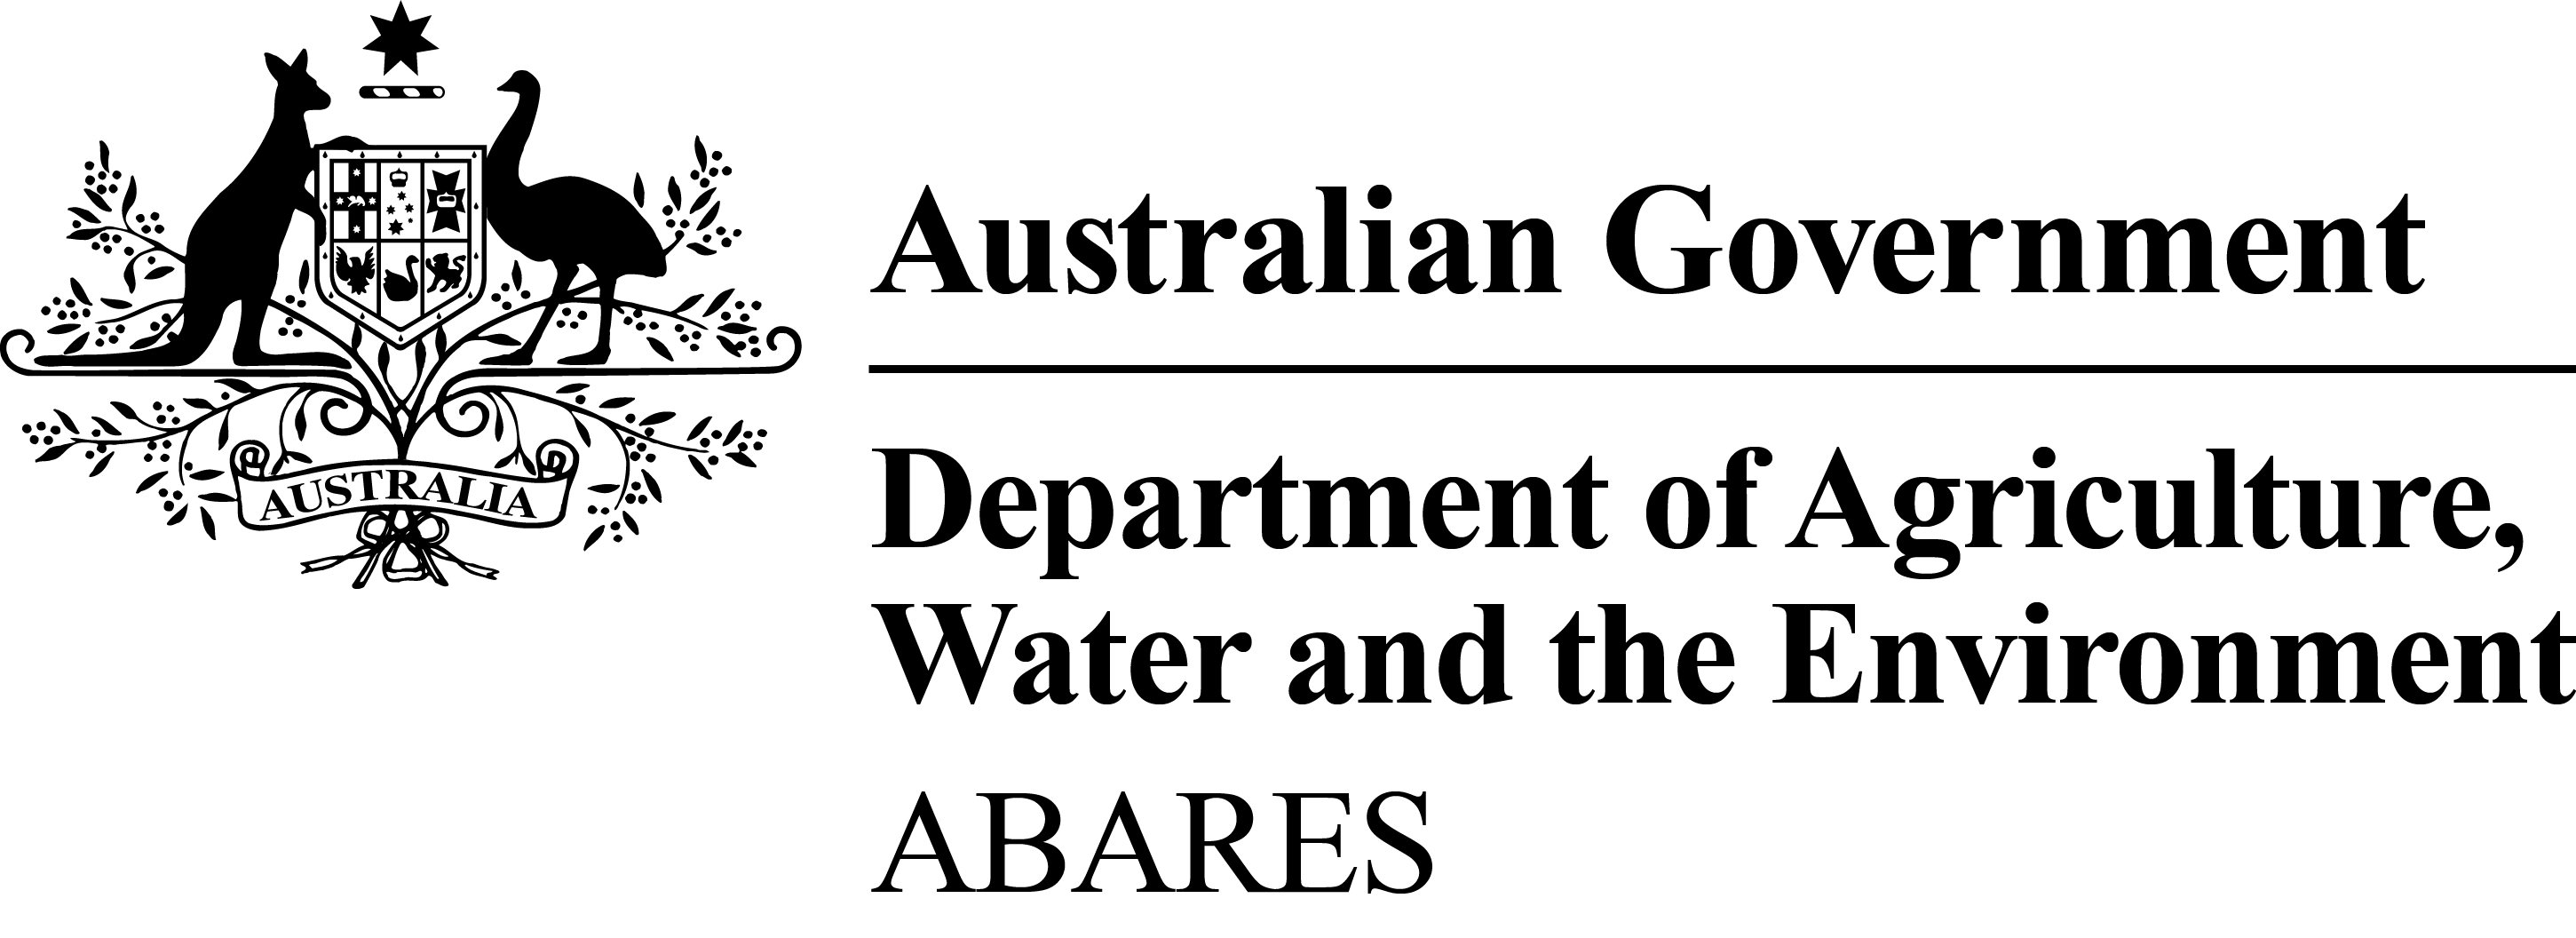 Australian Bureau of Agricultural and Resource Economics and Sciences